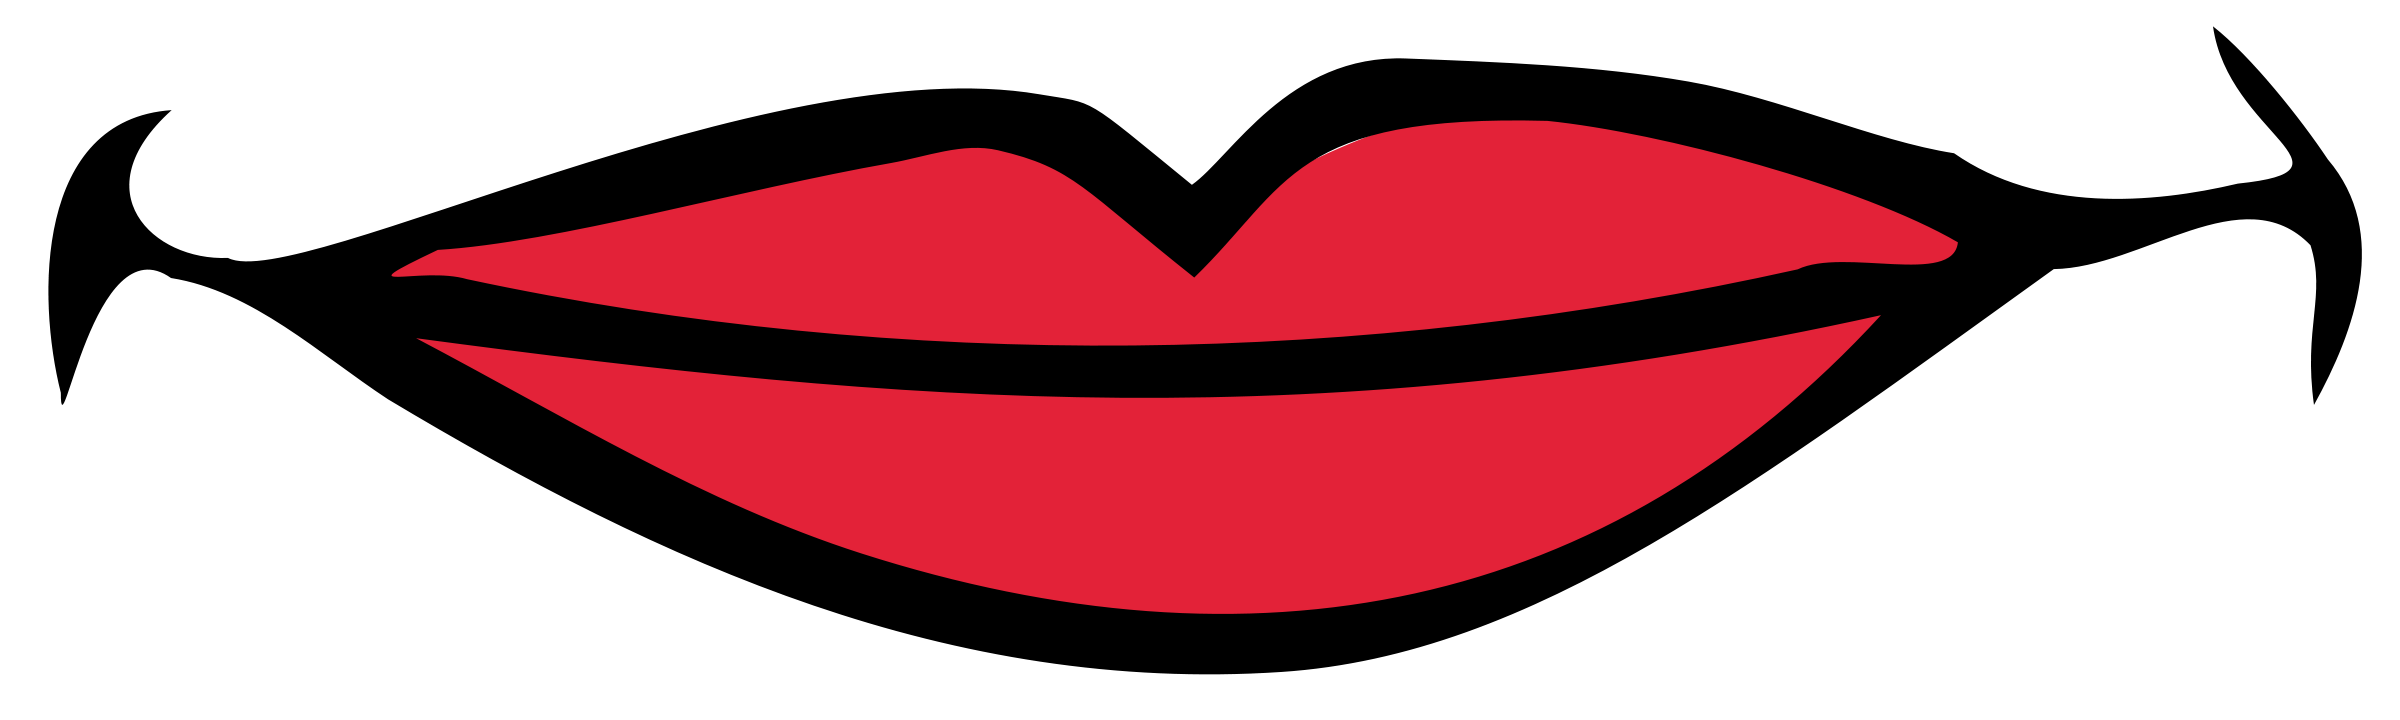 Smile Lips Clipart - Free Clipart Images